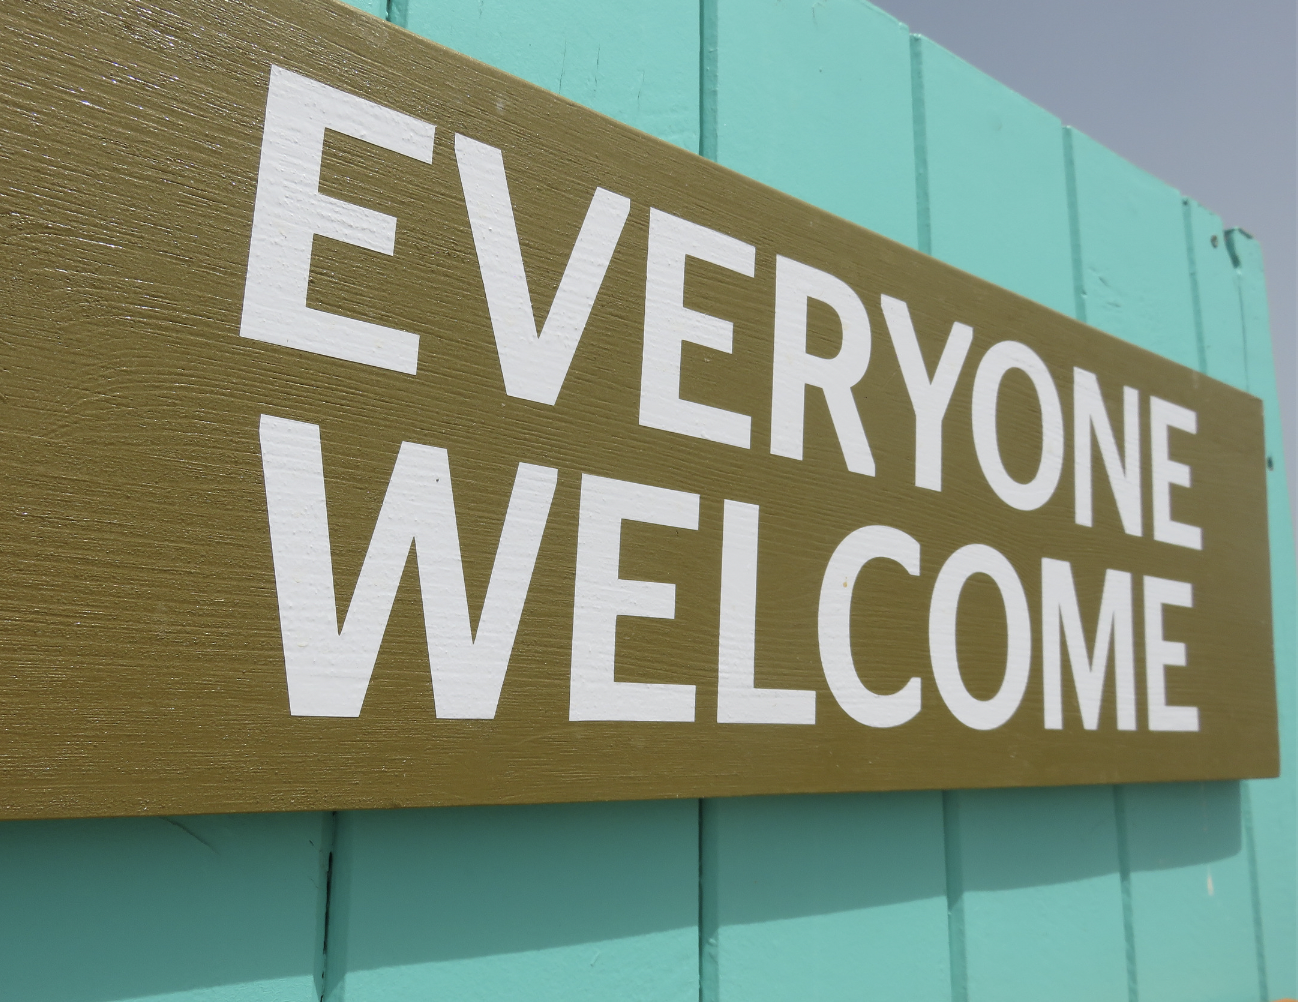 A sign that says "EVERYONE WELCOME"